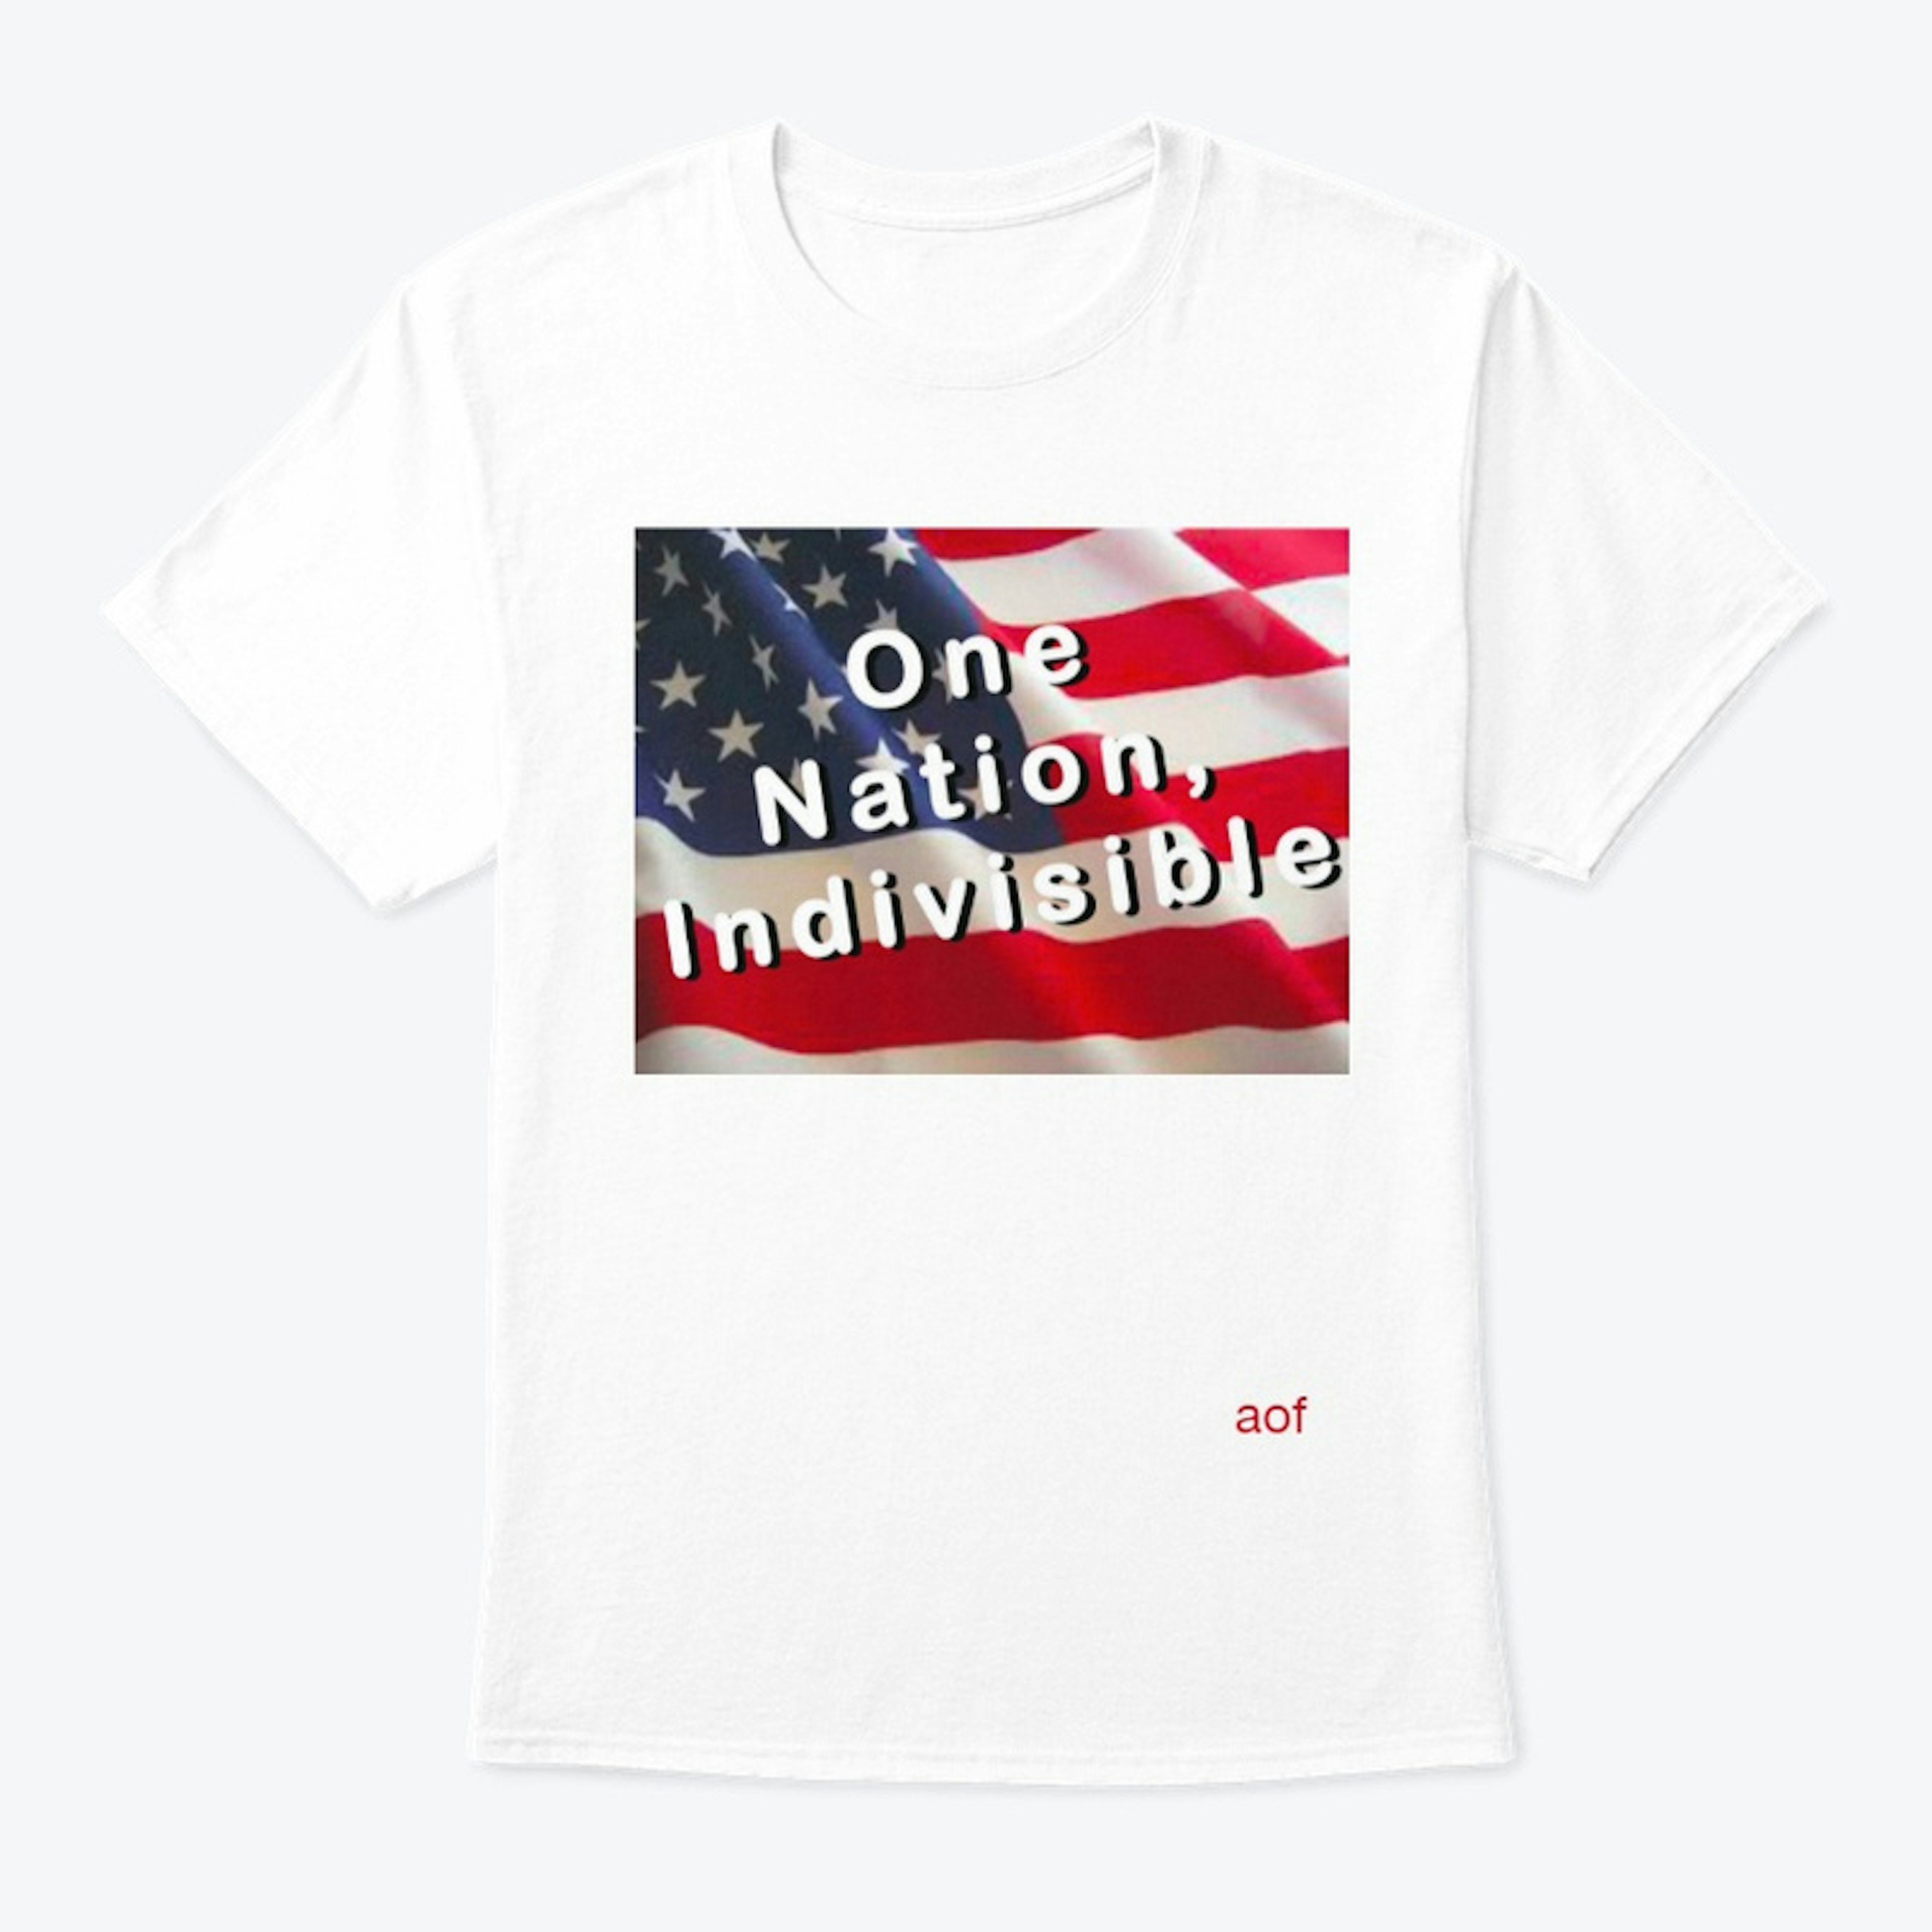 One Nation Indivisible